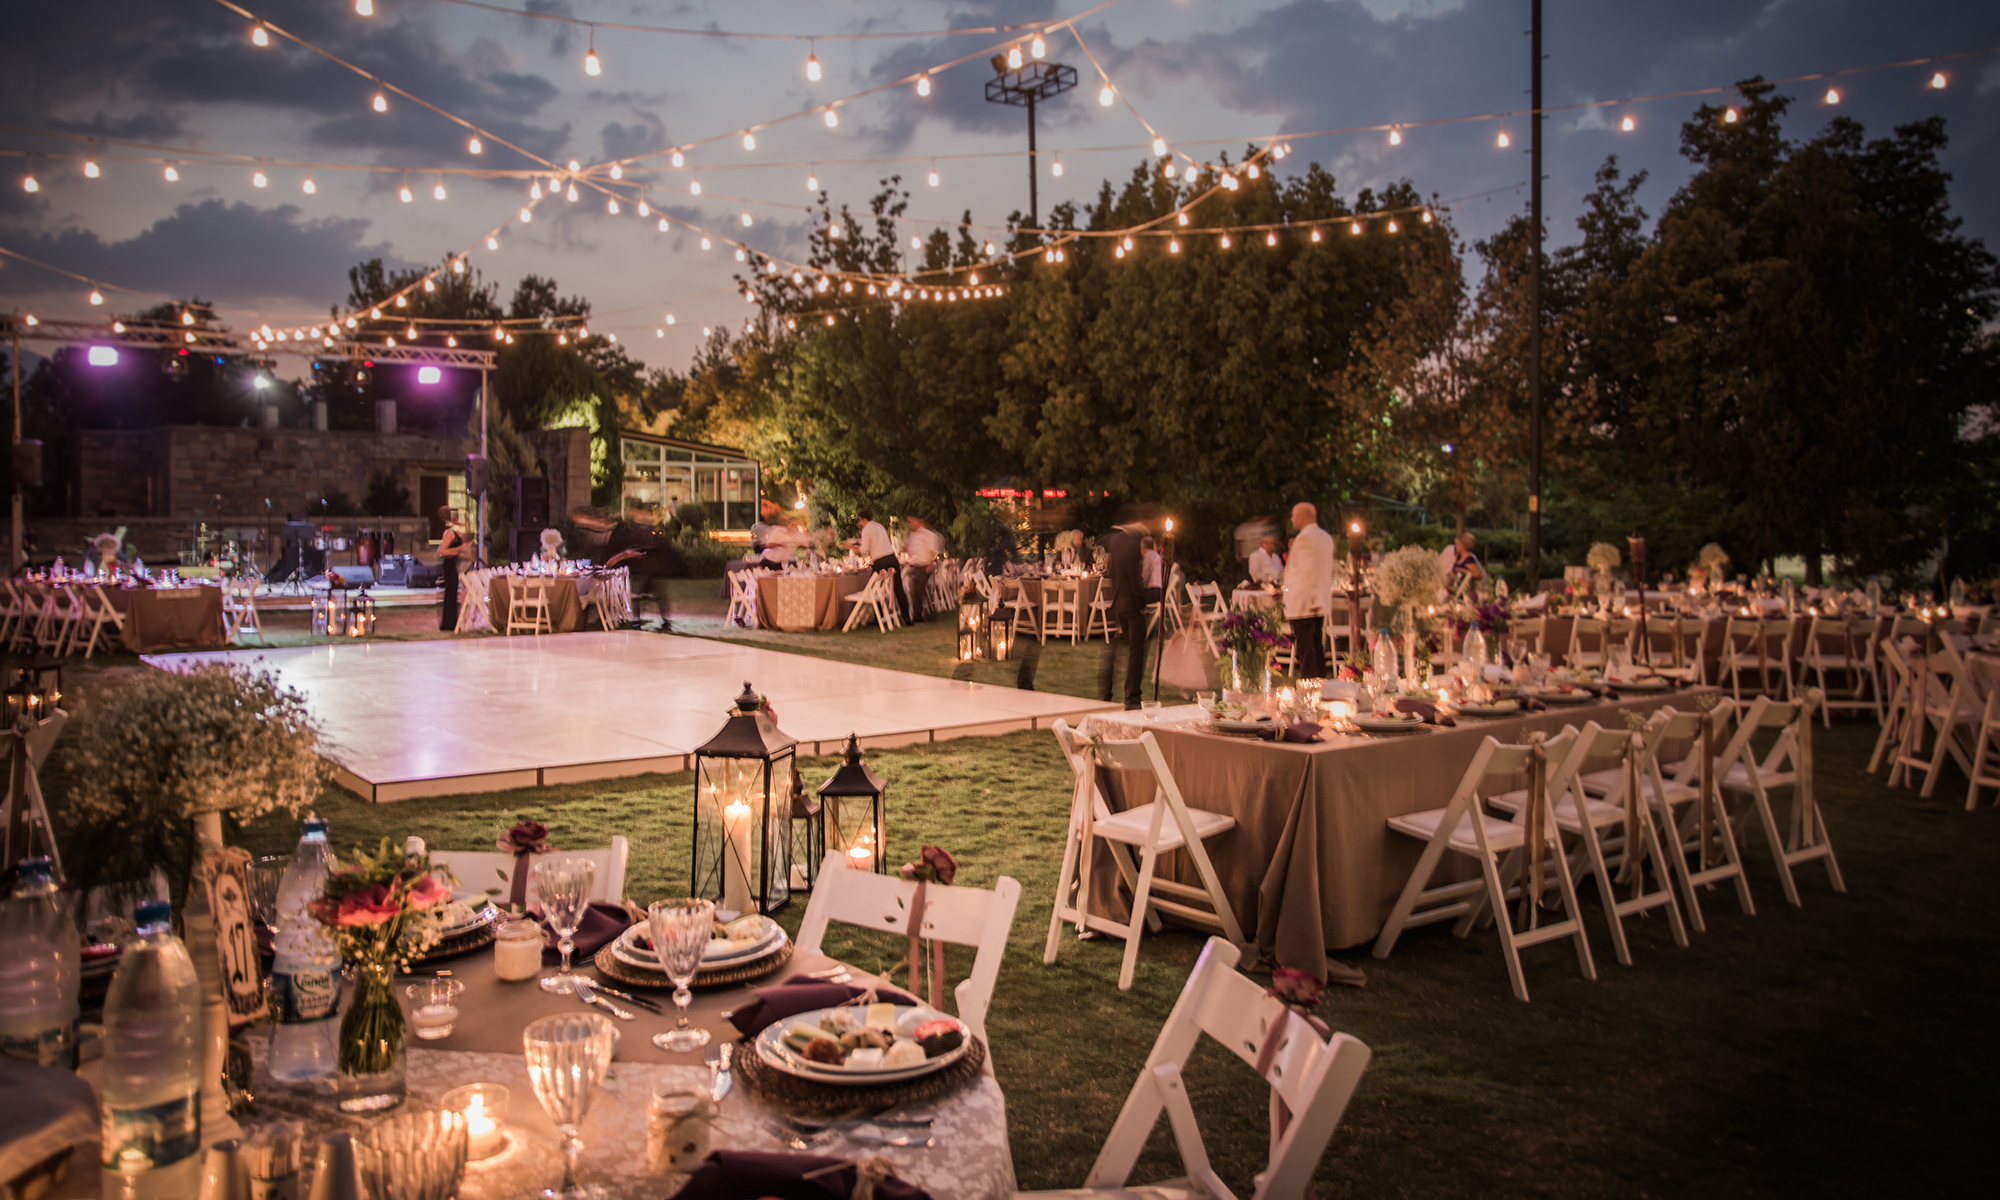 Event Lighting Ideas from Classic to Futuristic